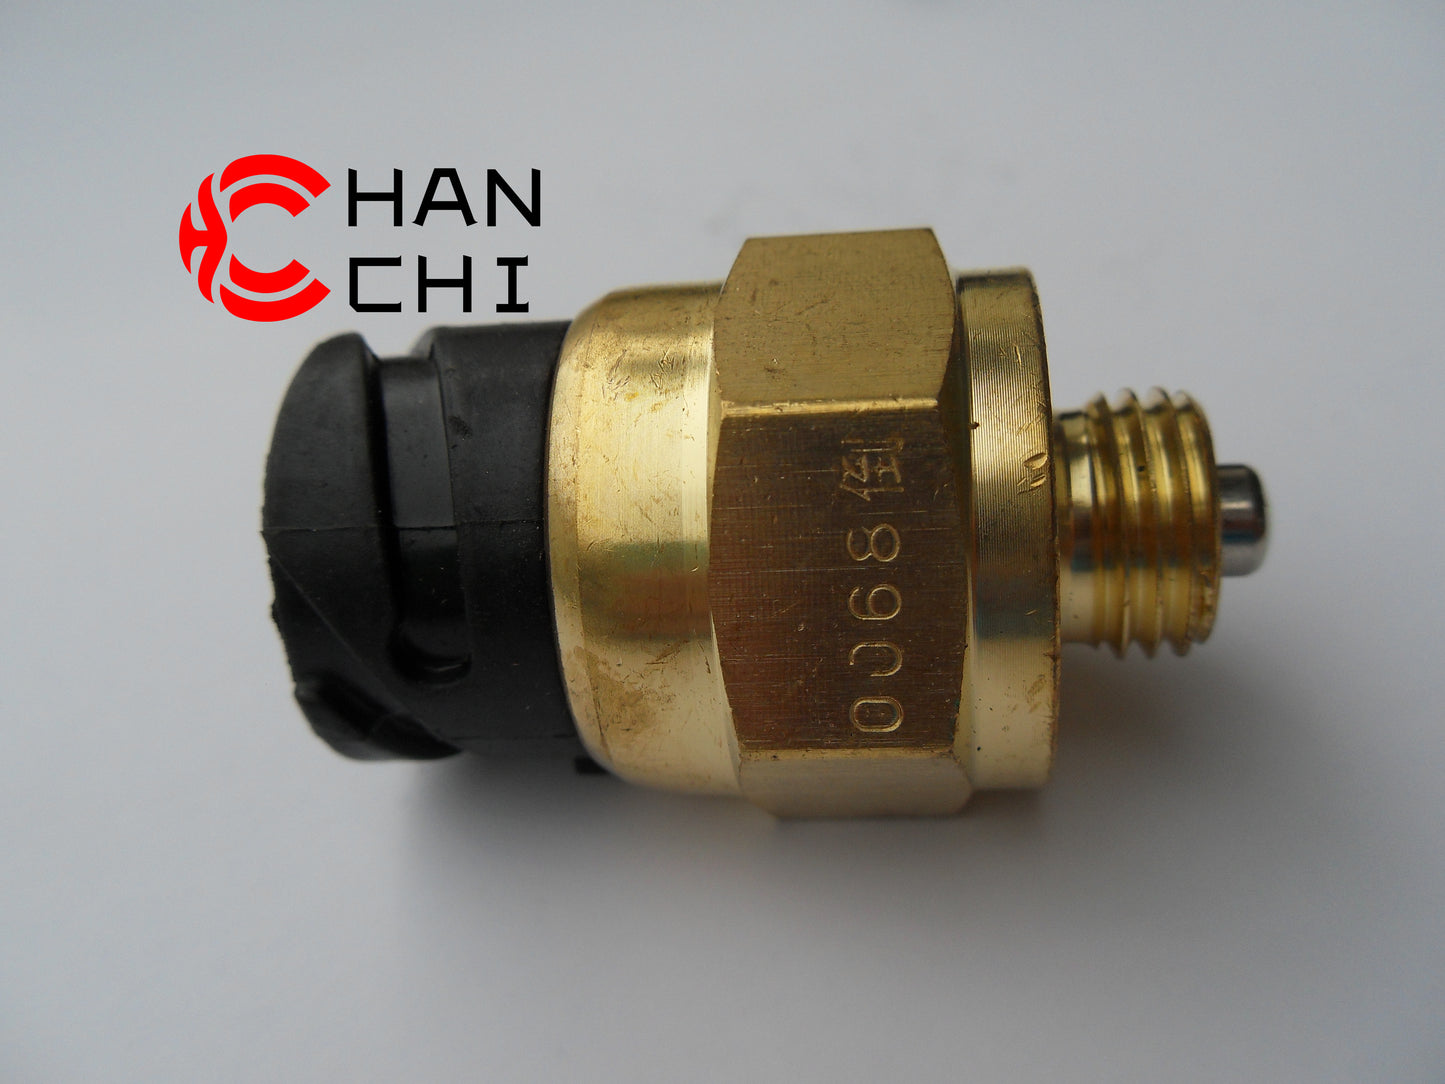 OEM: 0068 PLUGMaterial: metalColor: black goldenOrigin: Made in ChinaWeight: 50gPacking List: 1* Reversing Light Switch More Service We can provide OEM Manufacturing service We can Be your one-step solution for Auto Parts We can provide technical scheme for you Feel Free to Contact Us, We will get back to you as soon as possible.